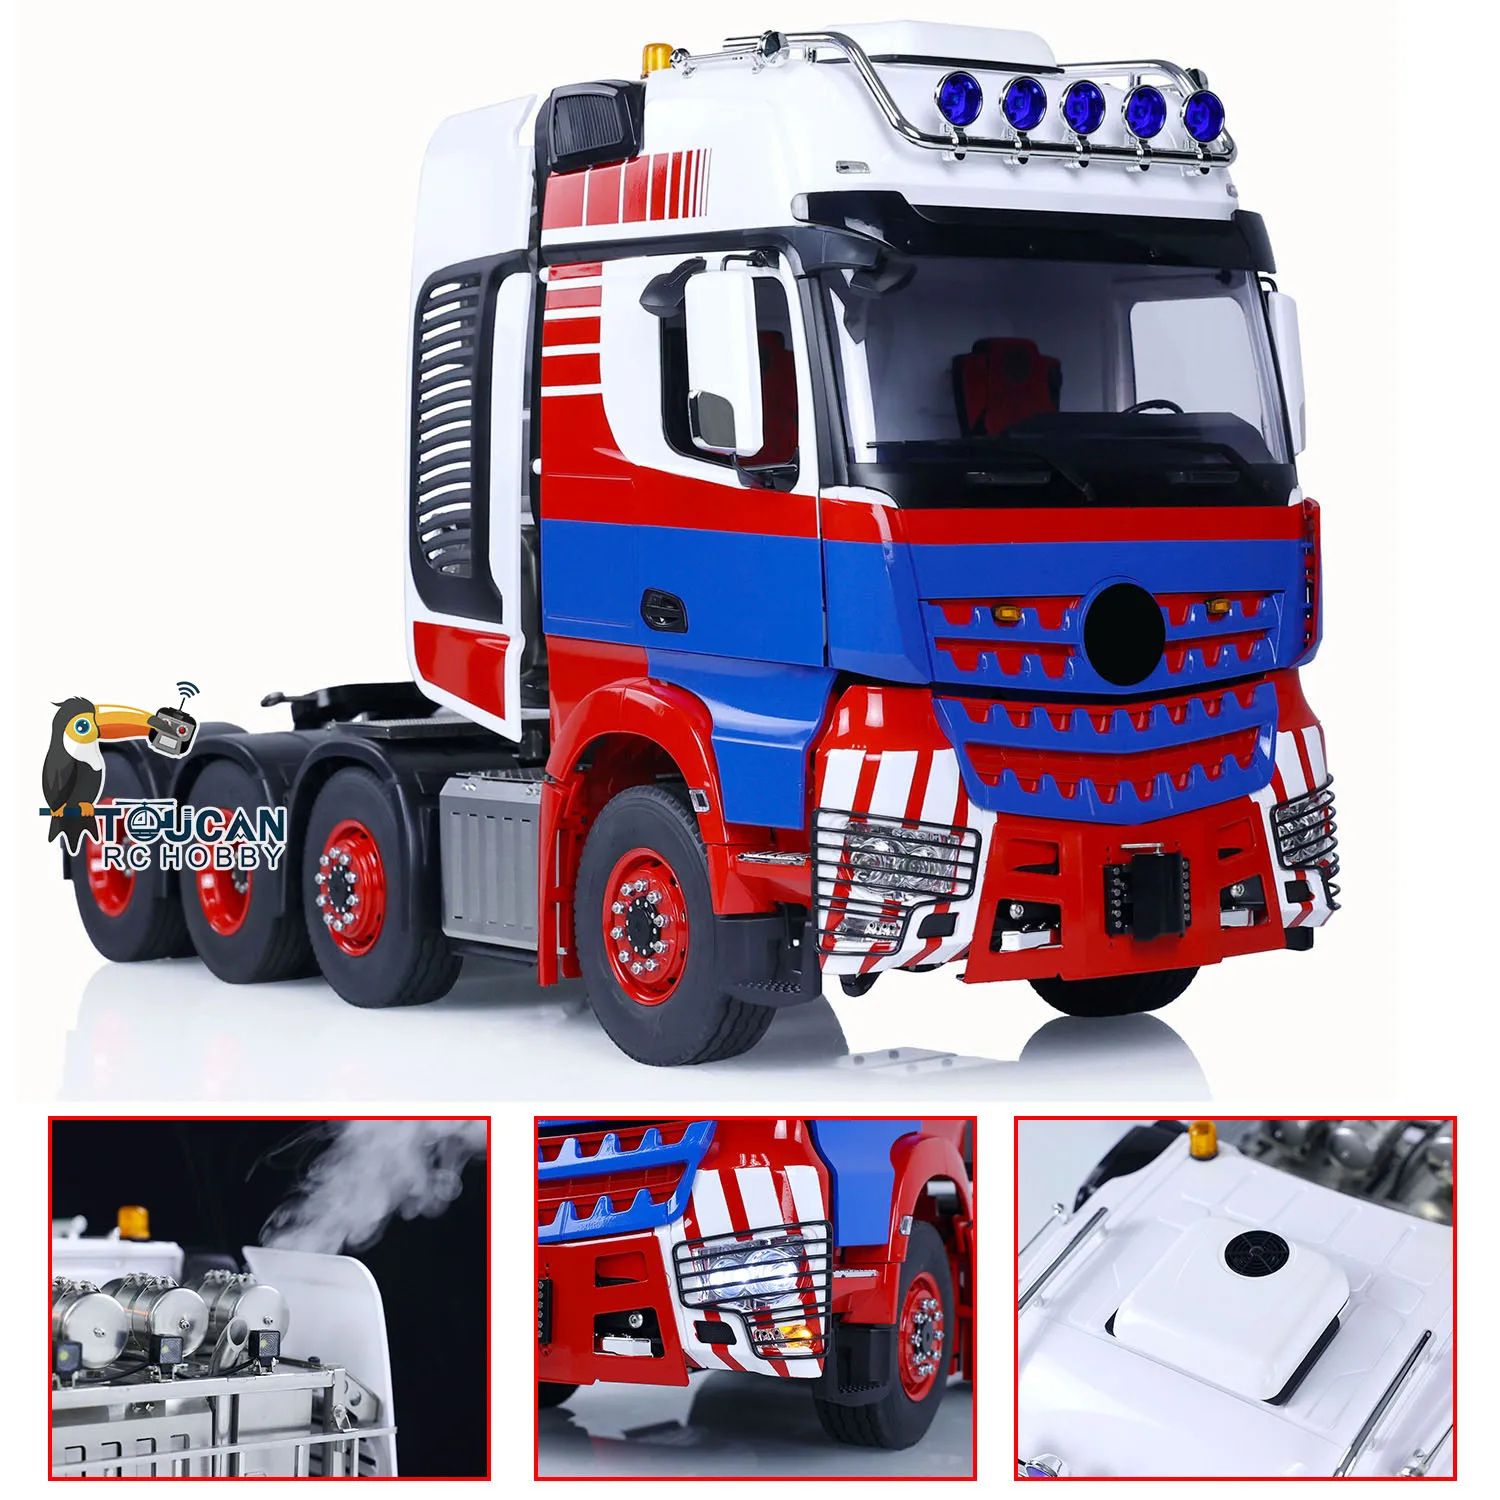 

1/14 RC Tractor Truck Radio Control LESU 8x8 Metal Chassis Cars Smoke Unit Sound NEW Toucan Hobby Painted Assembled Model Trucks